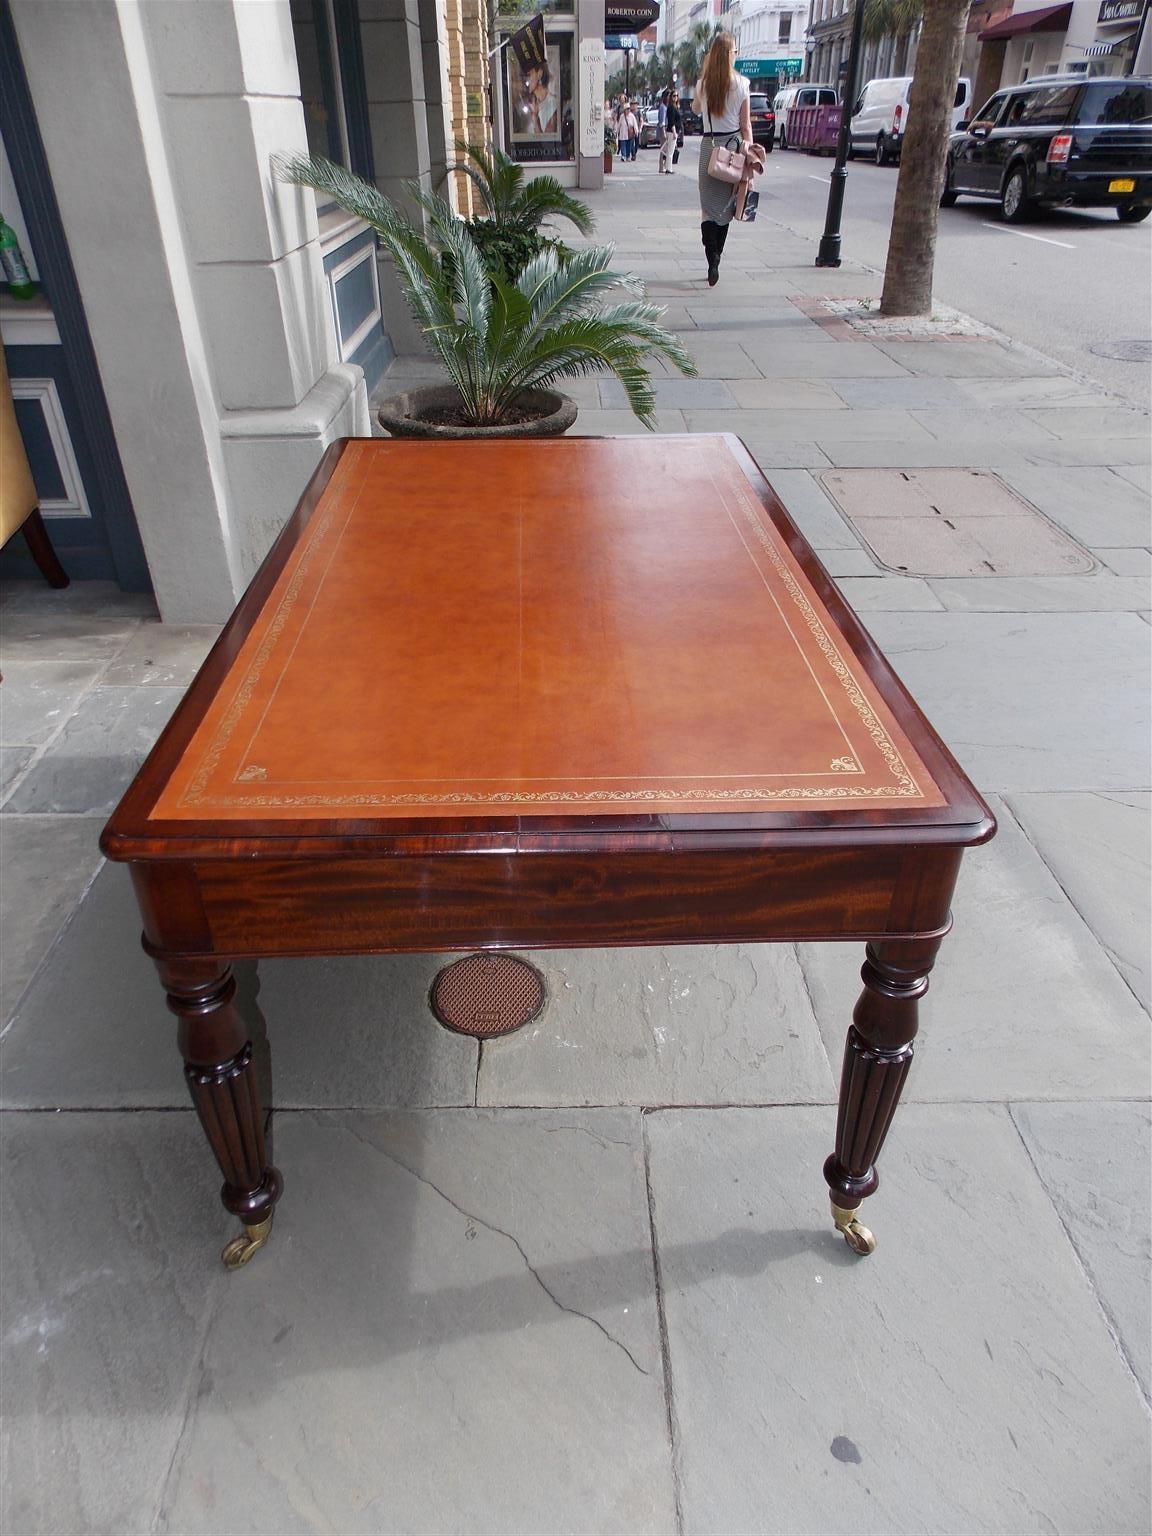 George III English Mahogany Leather Top Four-Drawer Partners Desk on Casters, Circa 1820